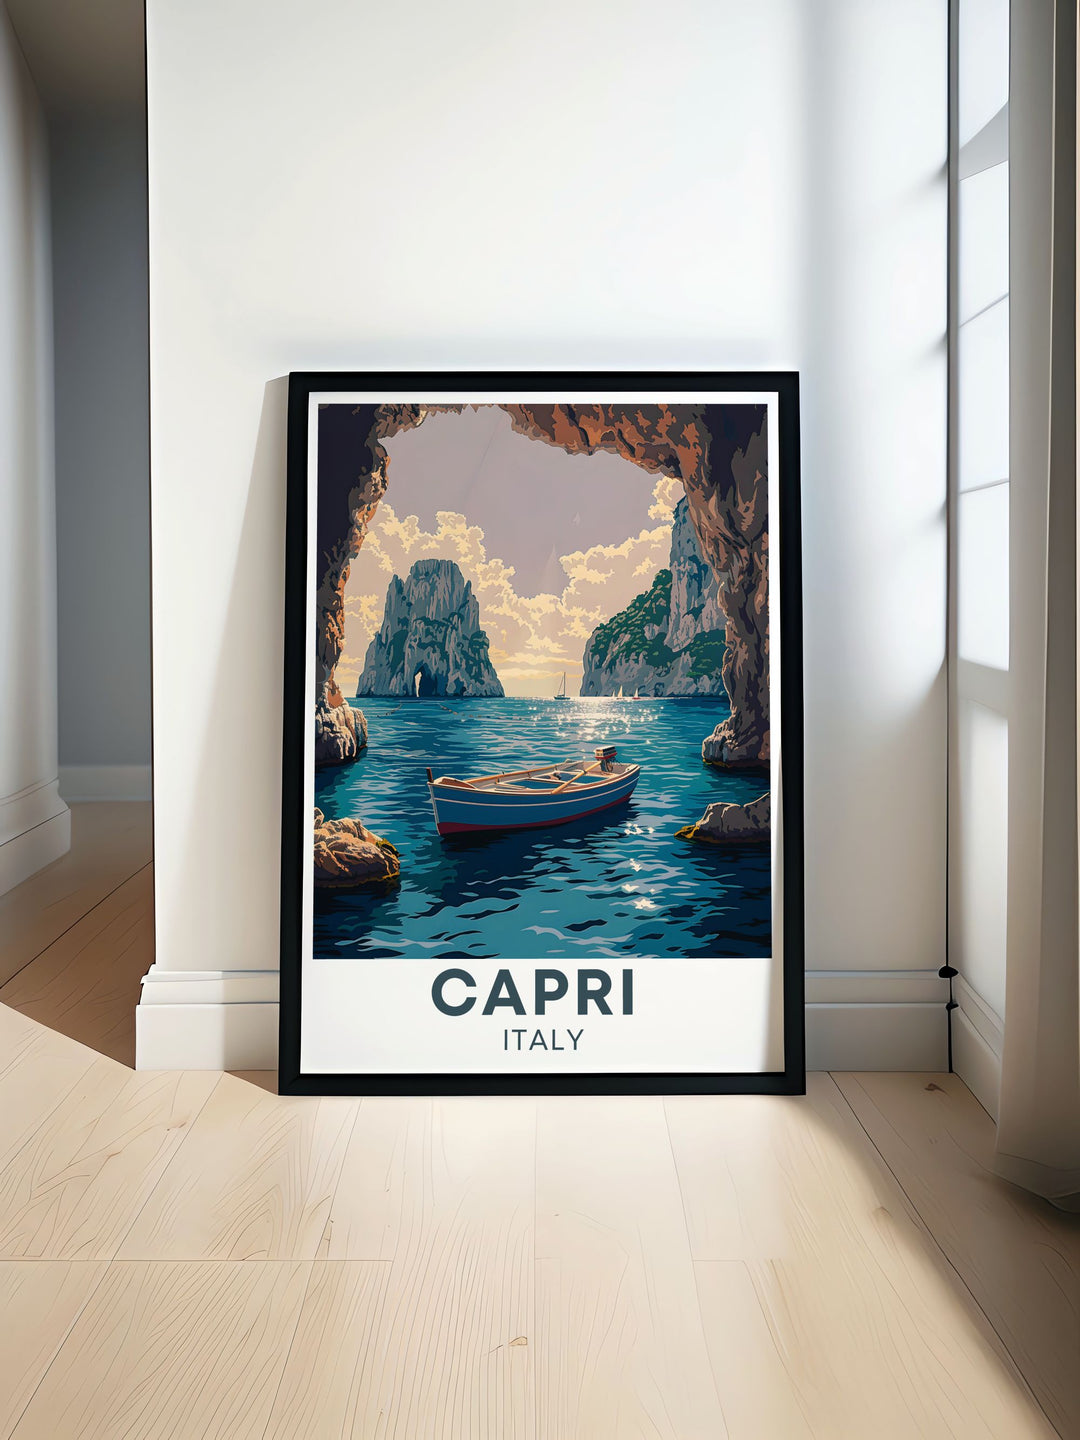 Showcasing the enchanting Blue Grotto of Capri, this travel poster highlights the grottos mystical glow and serene waters, making it a dream destination for nature lovers. Perfect for those who appreciate iconic landscapes and natural beauty.